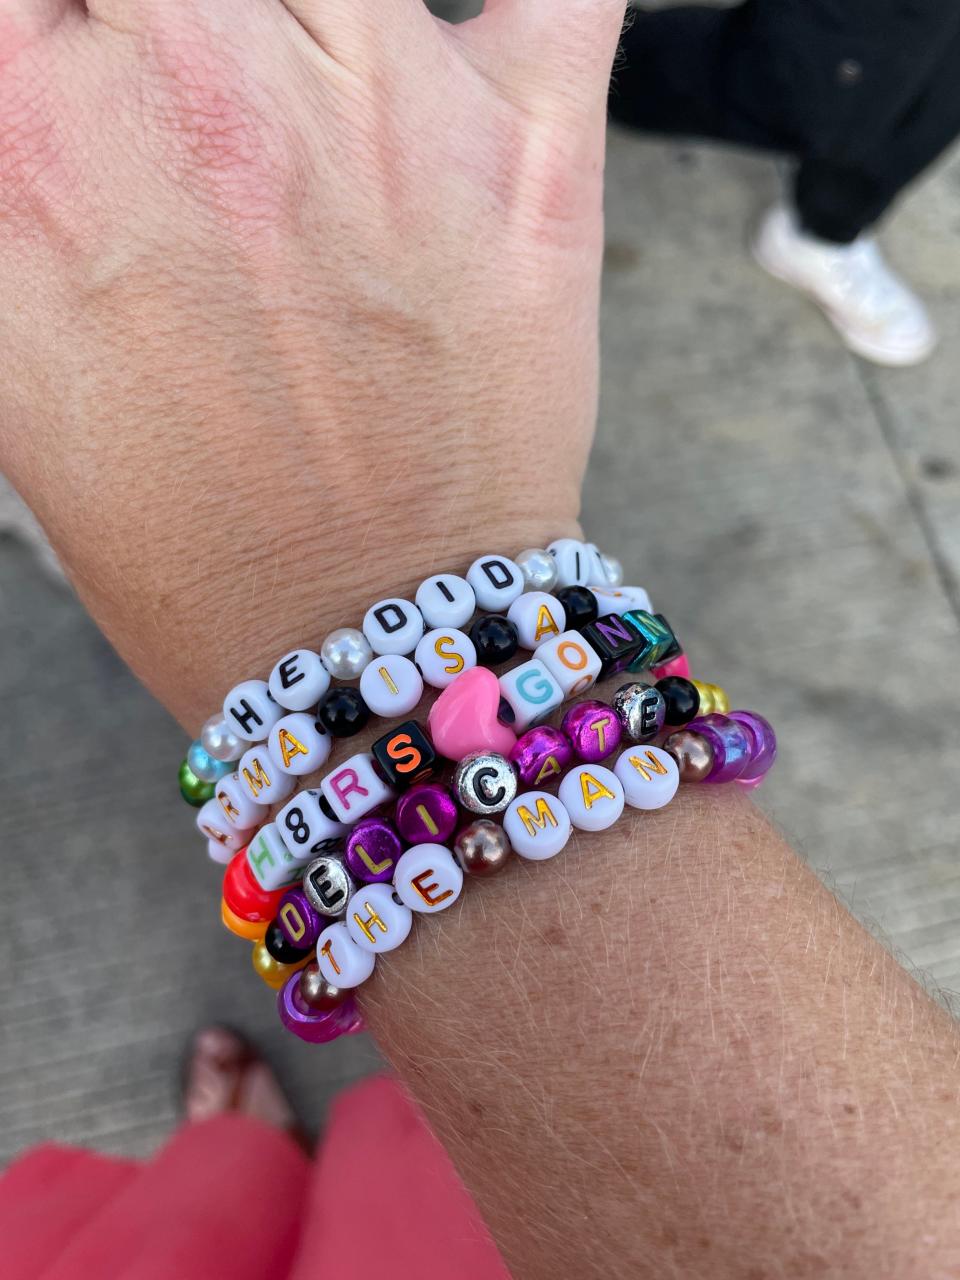 Concertgoers made Taylor Swift themed friendship bracelets to give away and trade at her concerts, shown outside Paycor Stadium on June 30, 2023 in Cincinnati, Ohio.